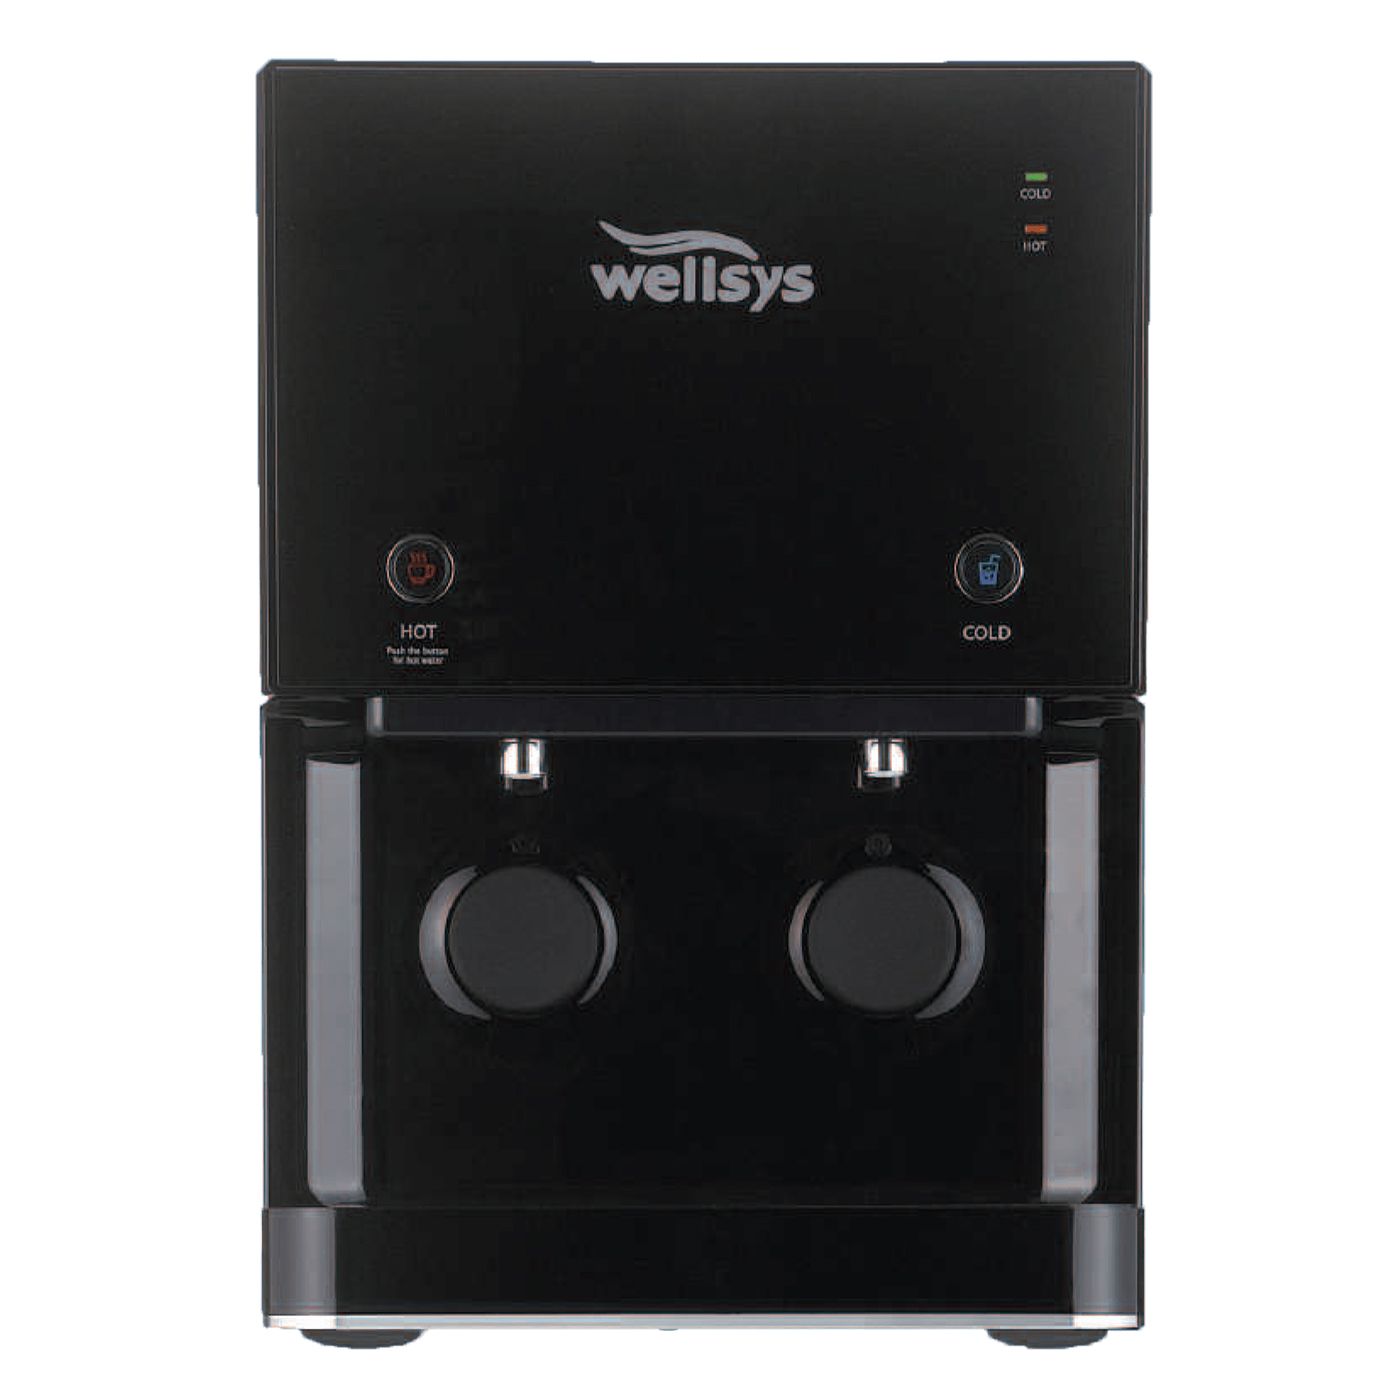 Wellsys 9000 Countertop Water Filter System